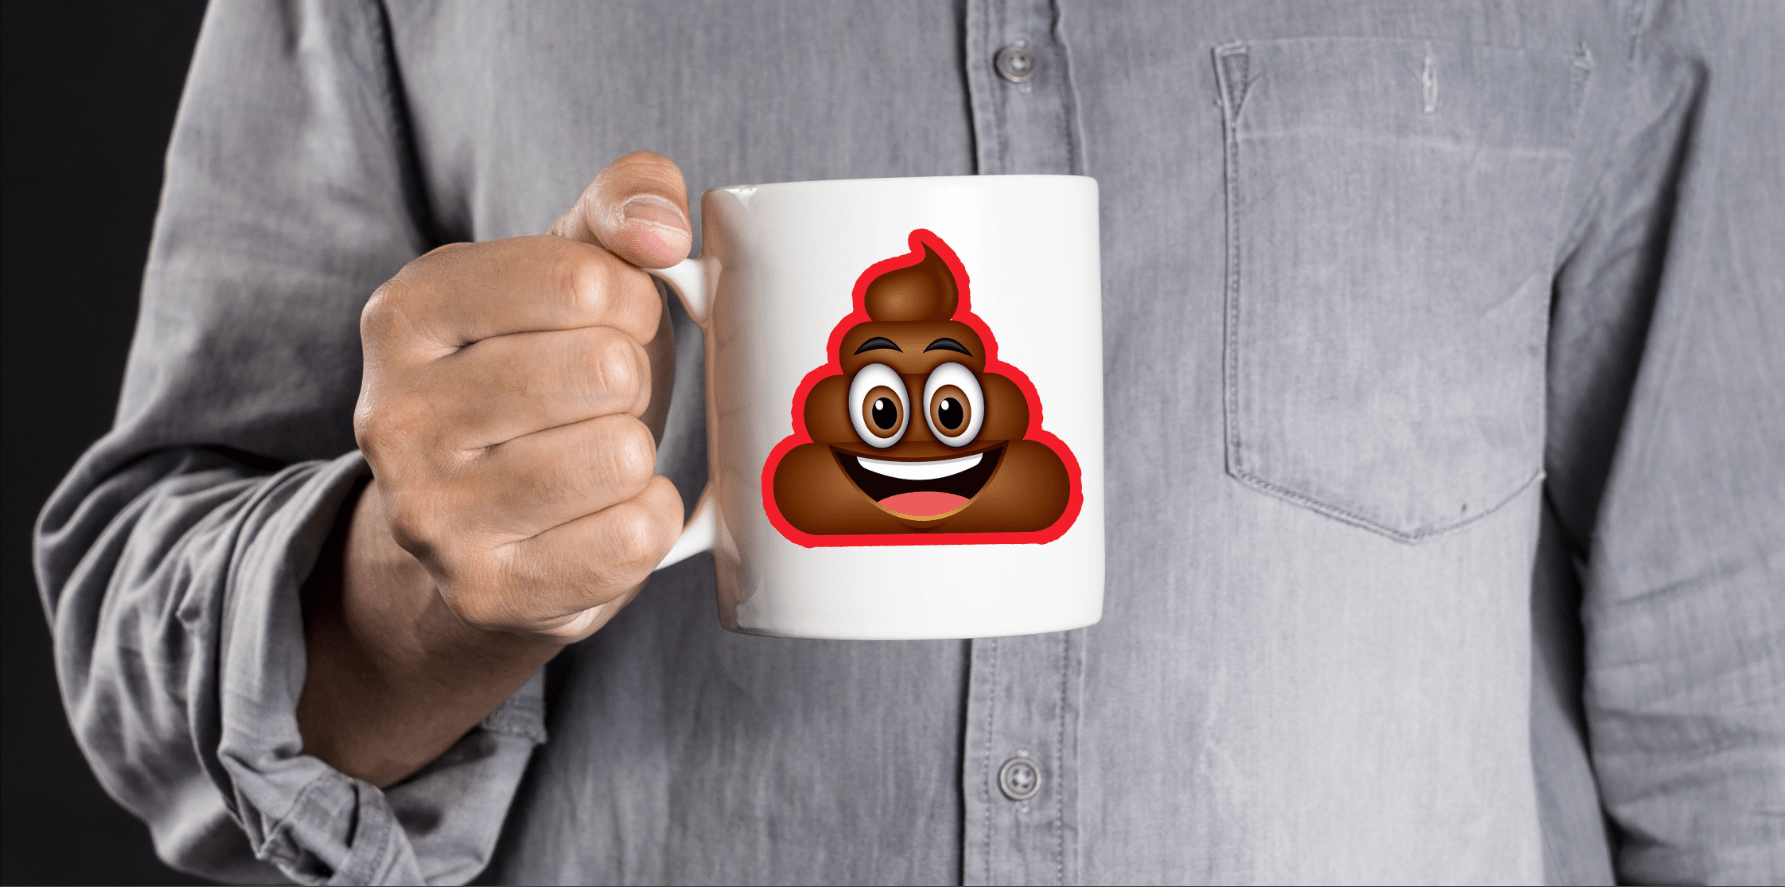 Why Might Drinking Coffee Cause Diarrhea?